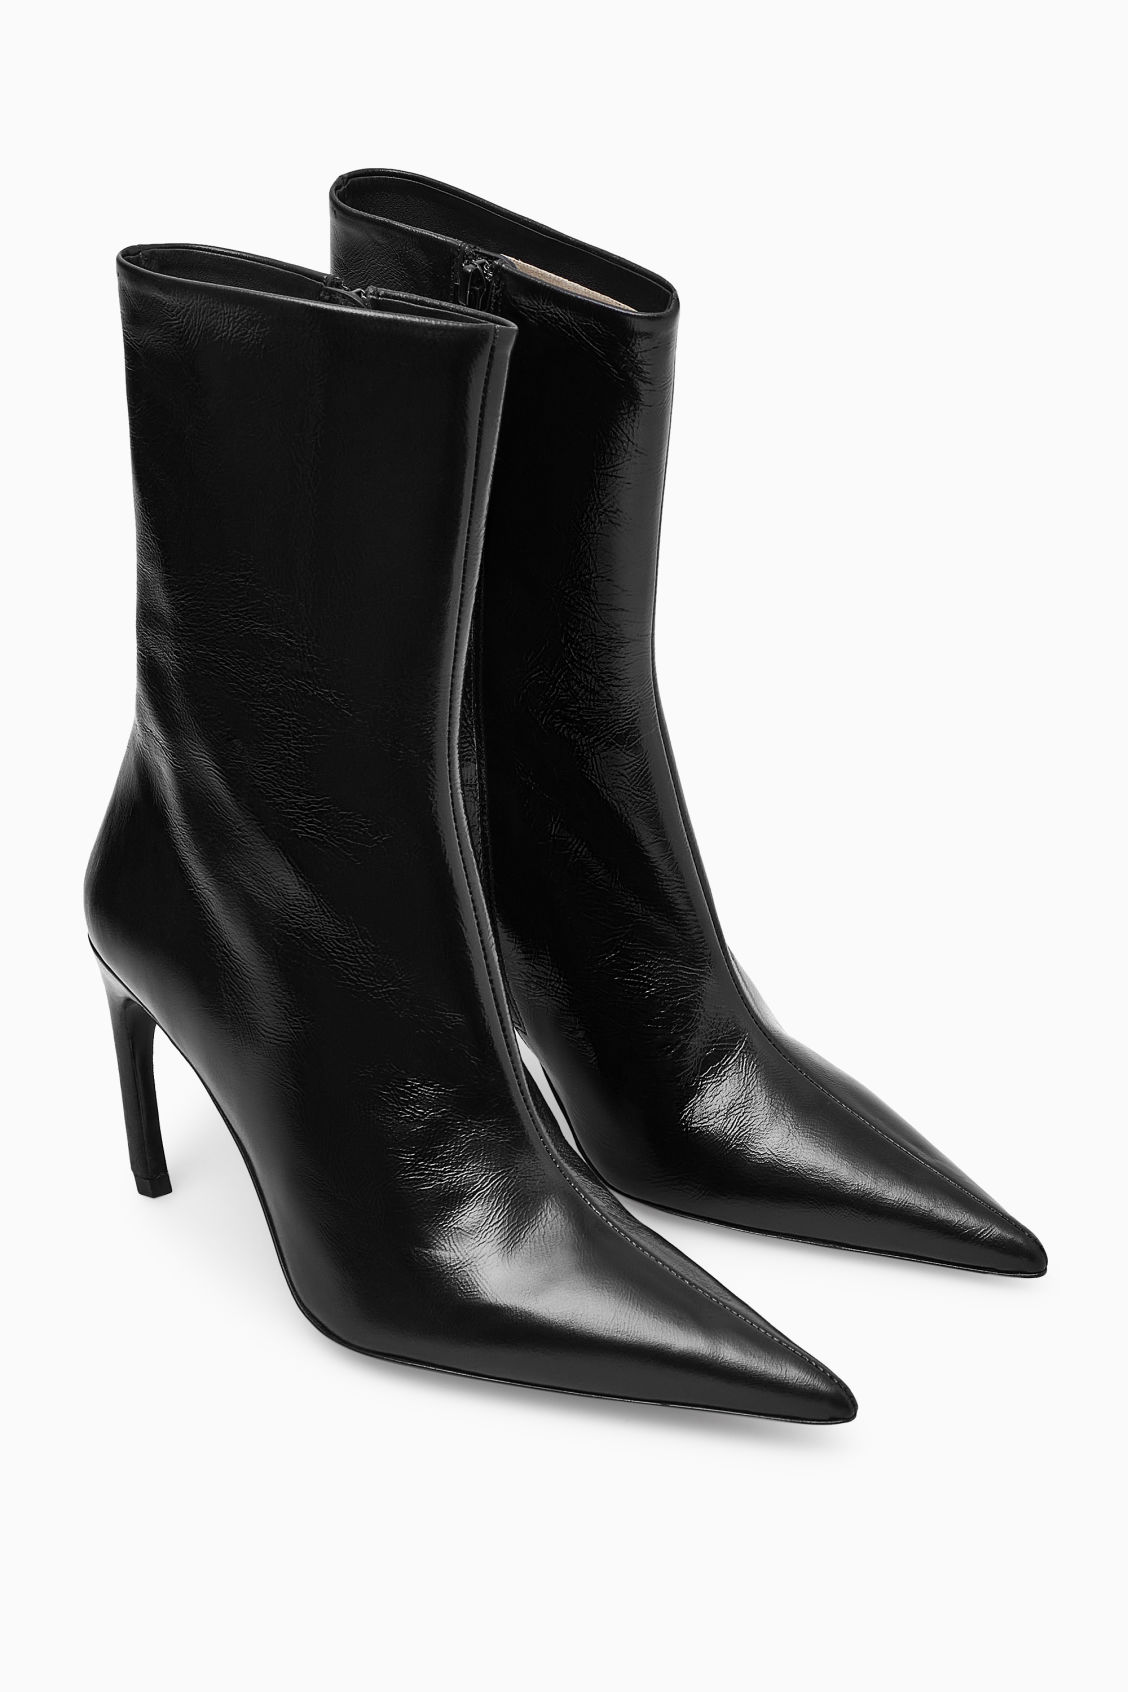 The 5 Best Ankle-Boot Trends That Will Make You Say Wow | Who What Wear UK